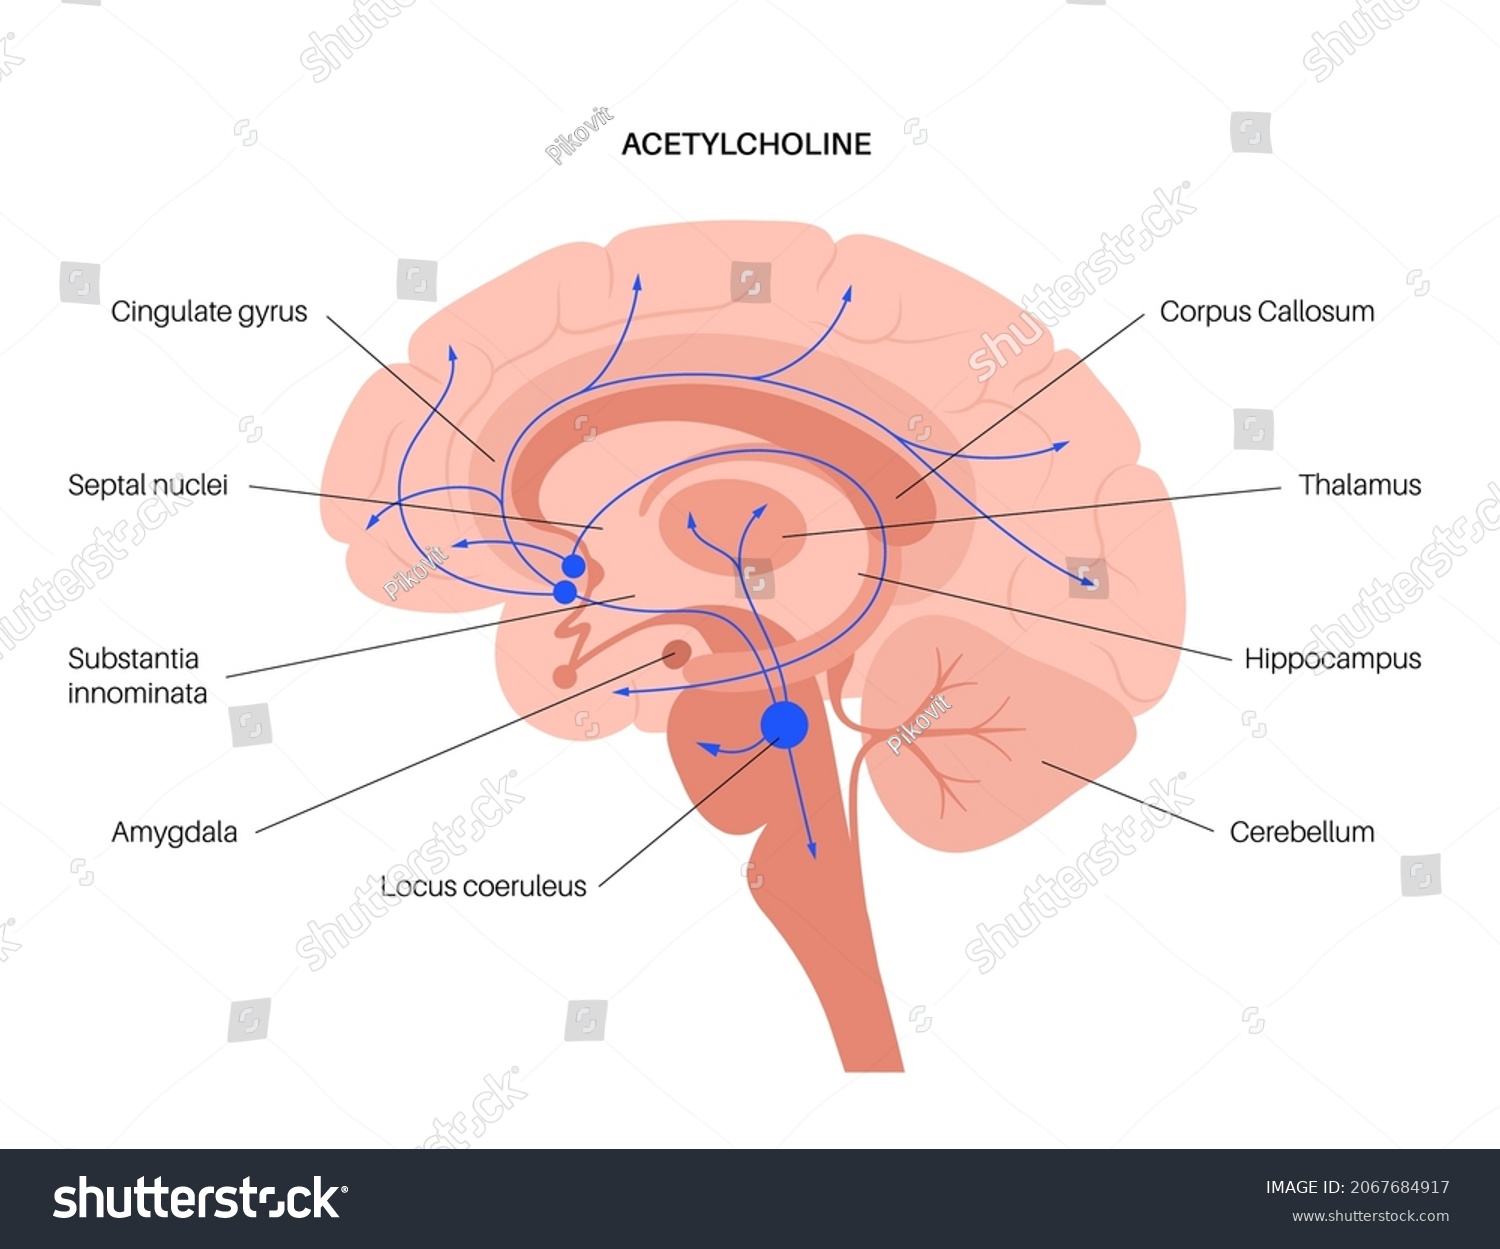 SVG of Acetylcholine hormones pathway in human brain. Neuromodulator and neurotransmitter in the autonomic nervous system. Arousal, attention, memory and motivation function. Cholinergic vector illustration. svg